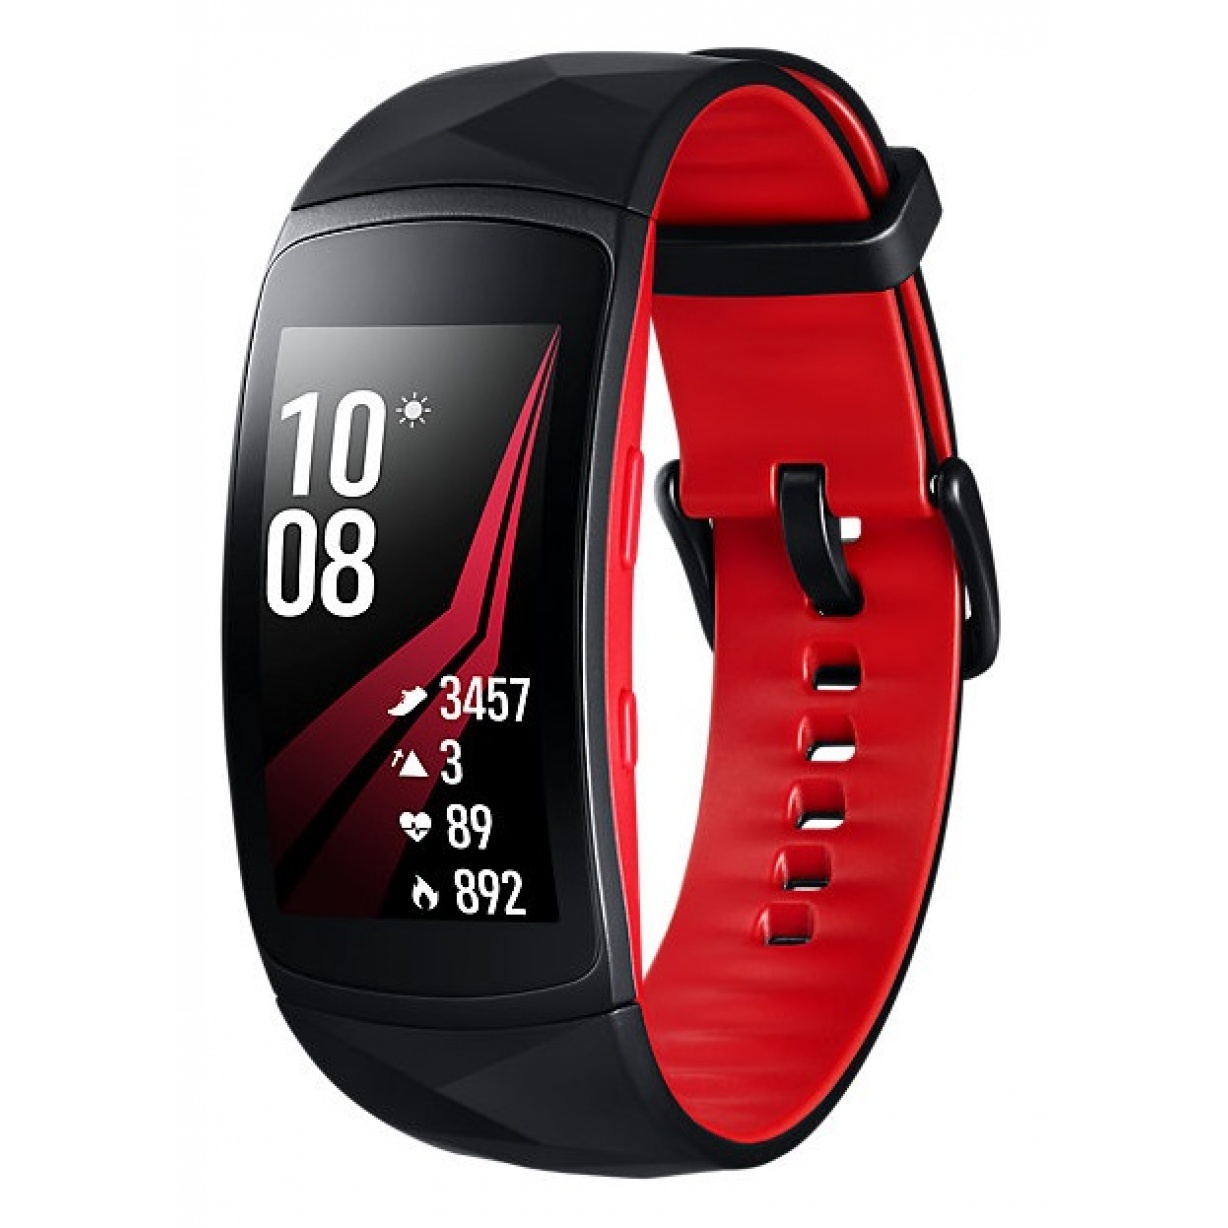 Samsung Gear Fit2 Pro R365 Large Red